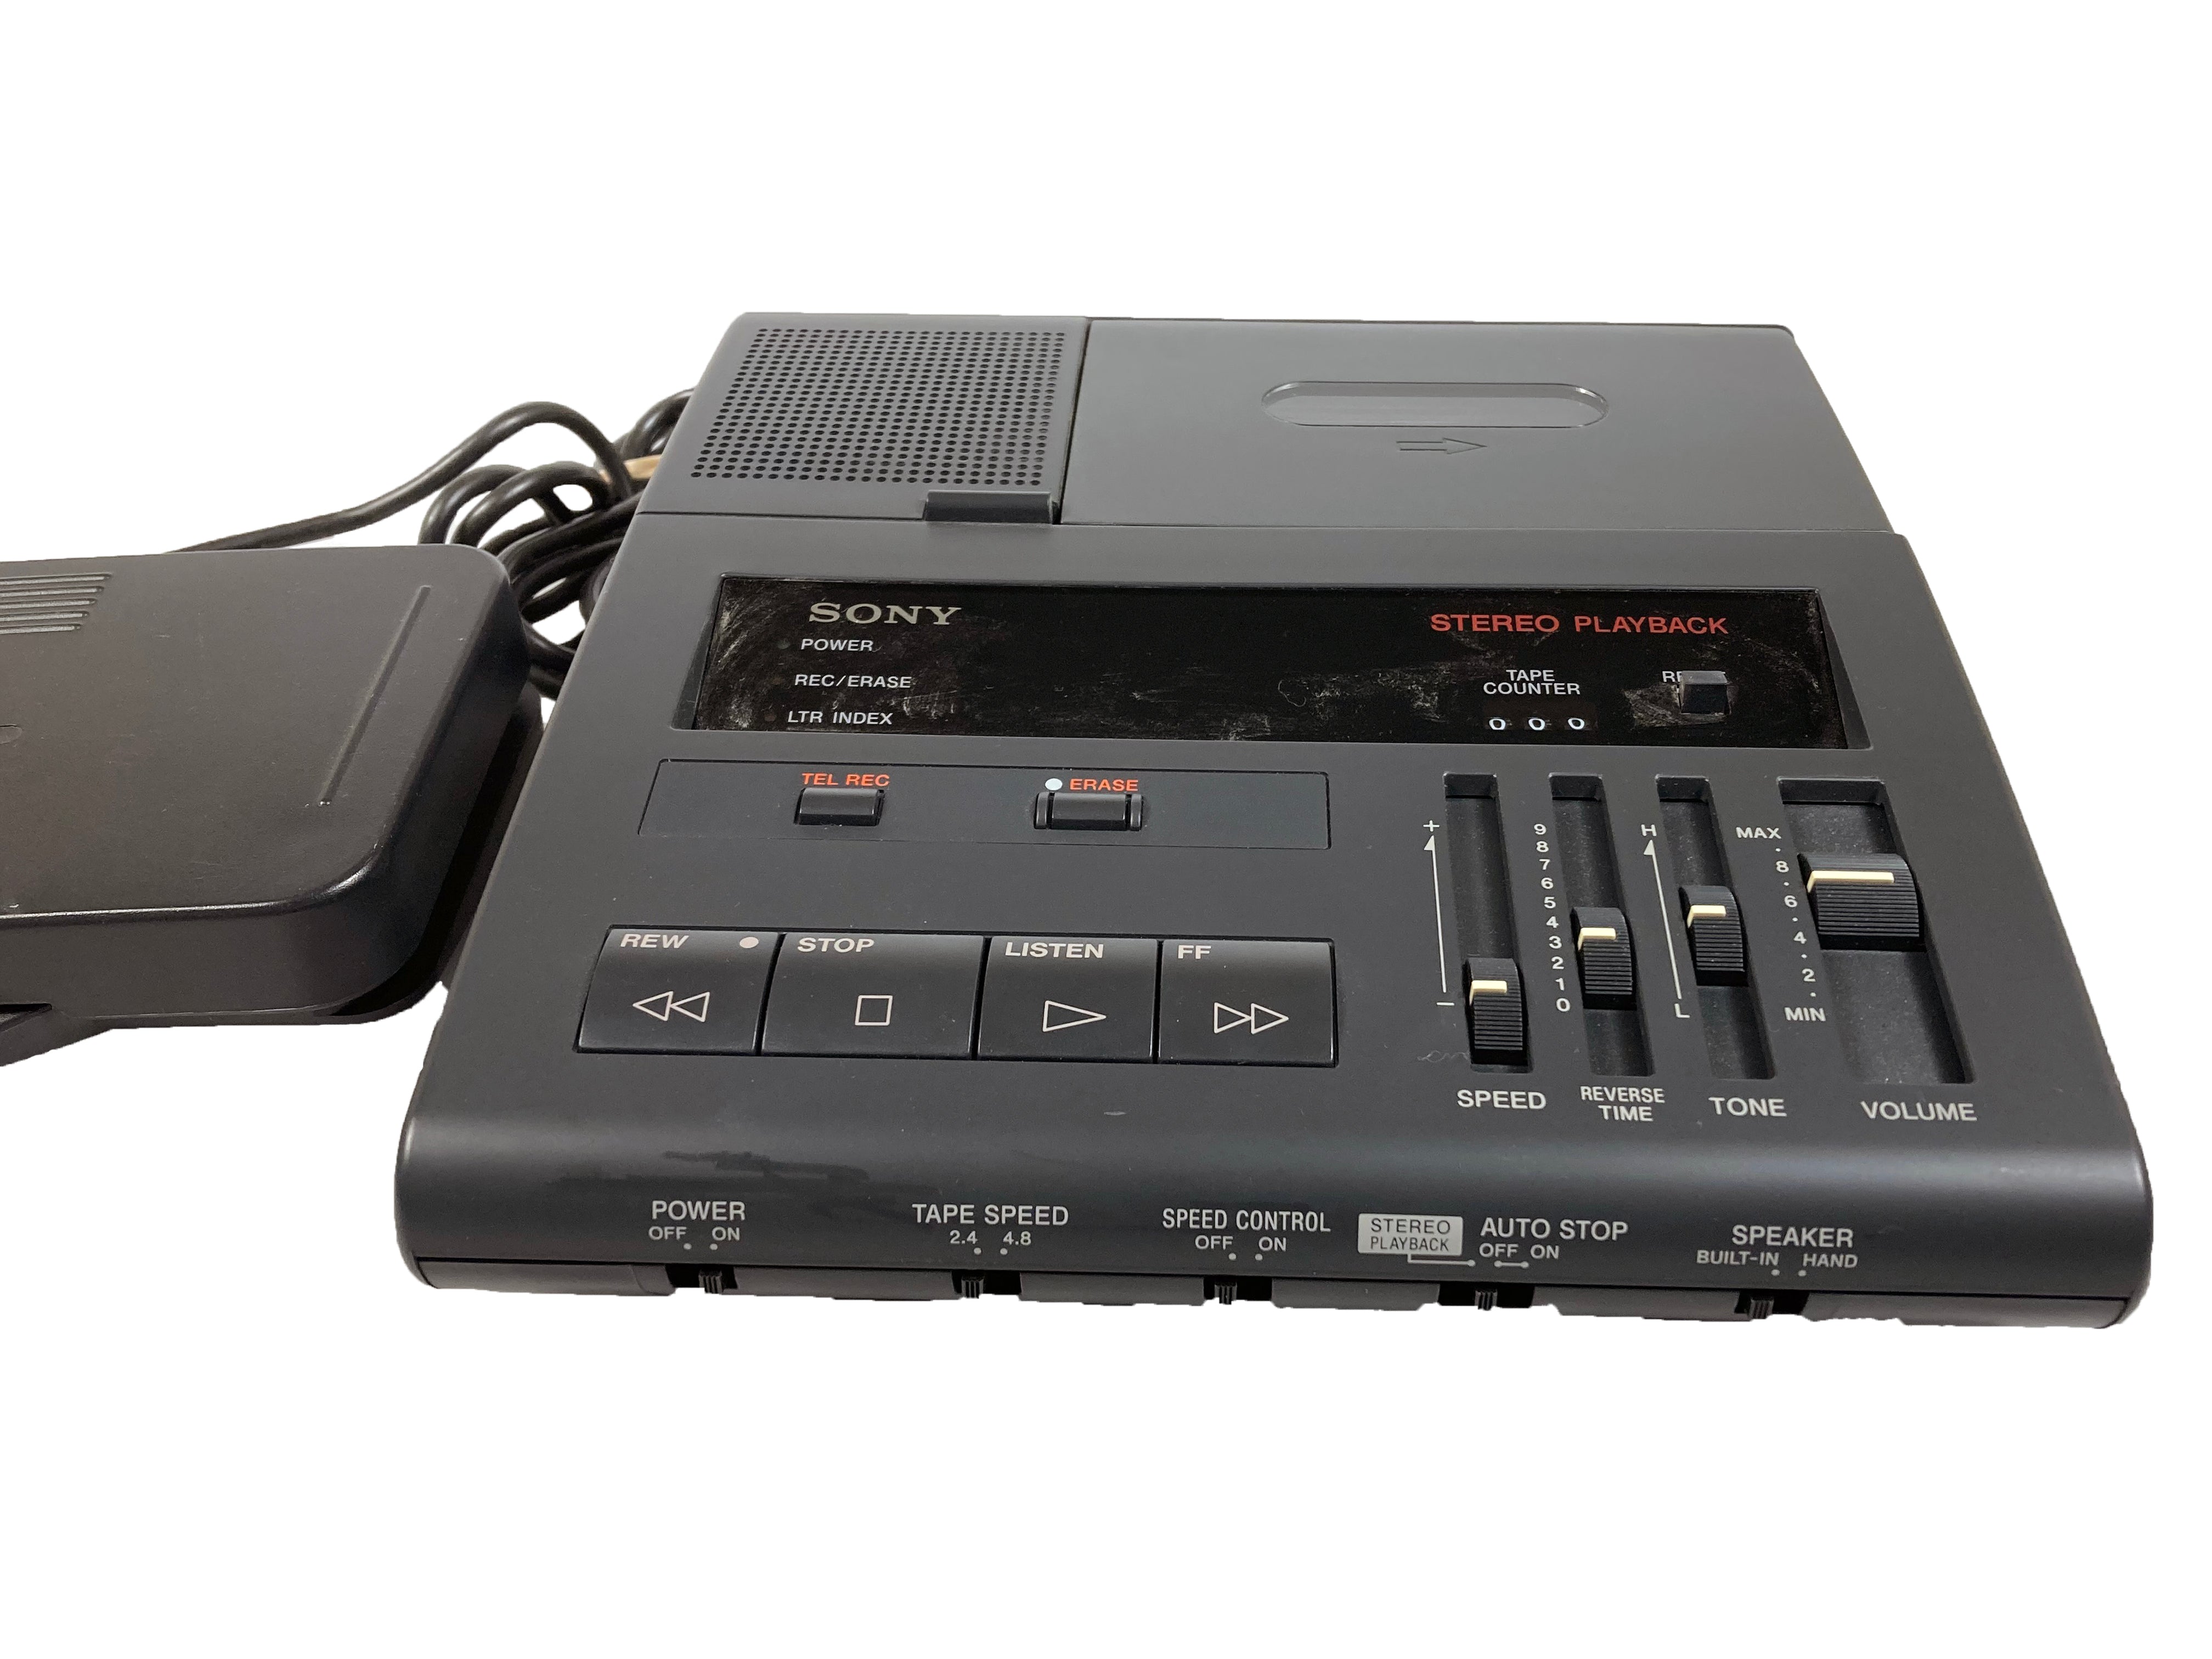 Sony BM-87DST Dictator/Transcriber with Foot Pedal